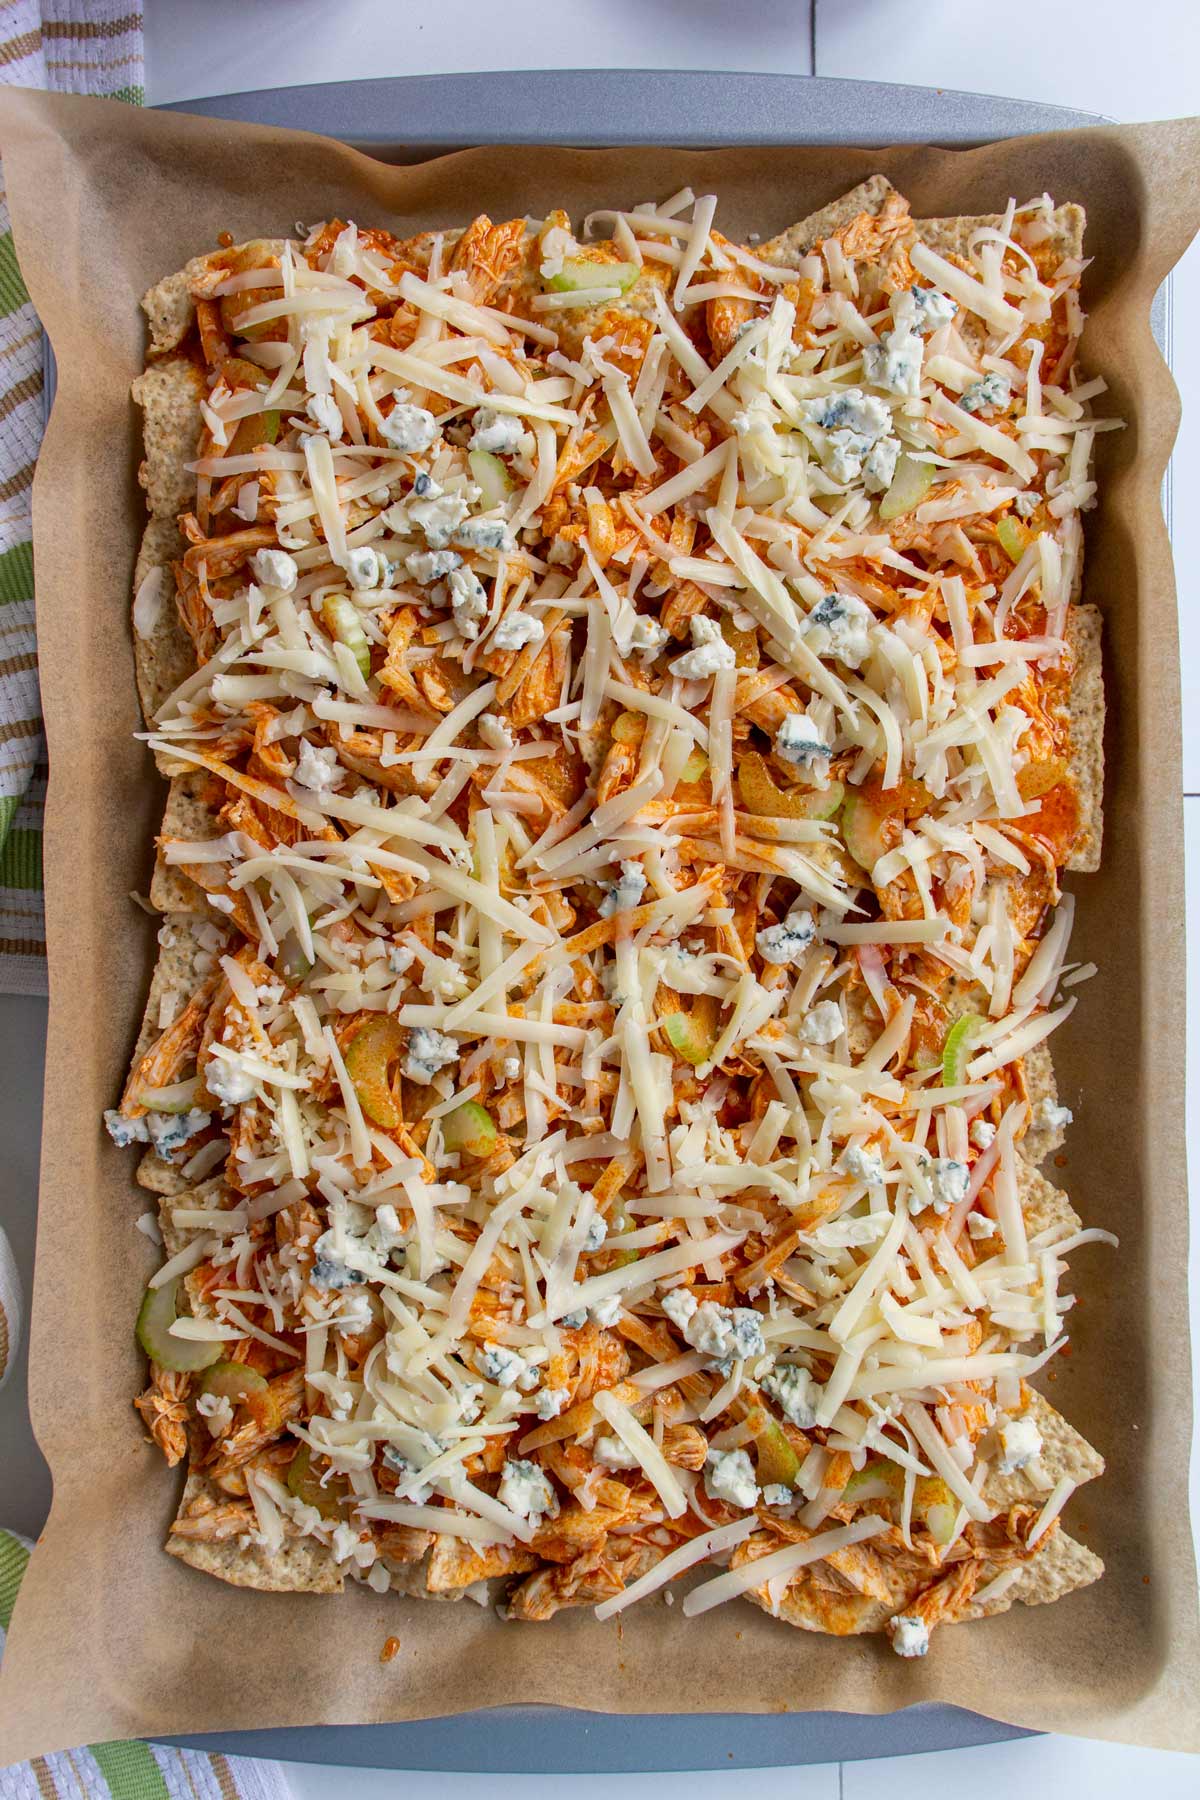 A sheet pan of Buffalo chicken nachos before baking with unmelted cheese on top.